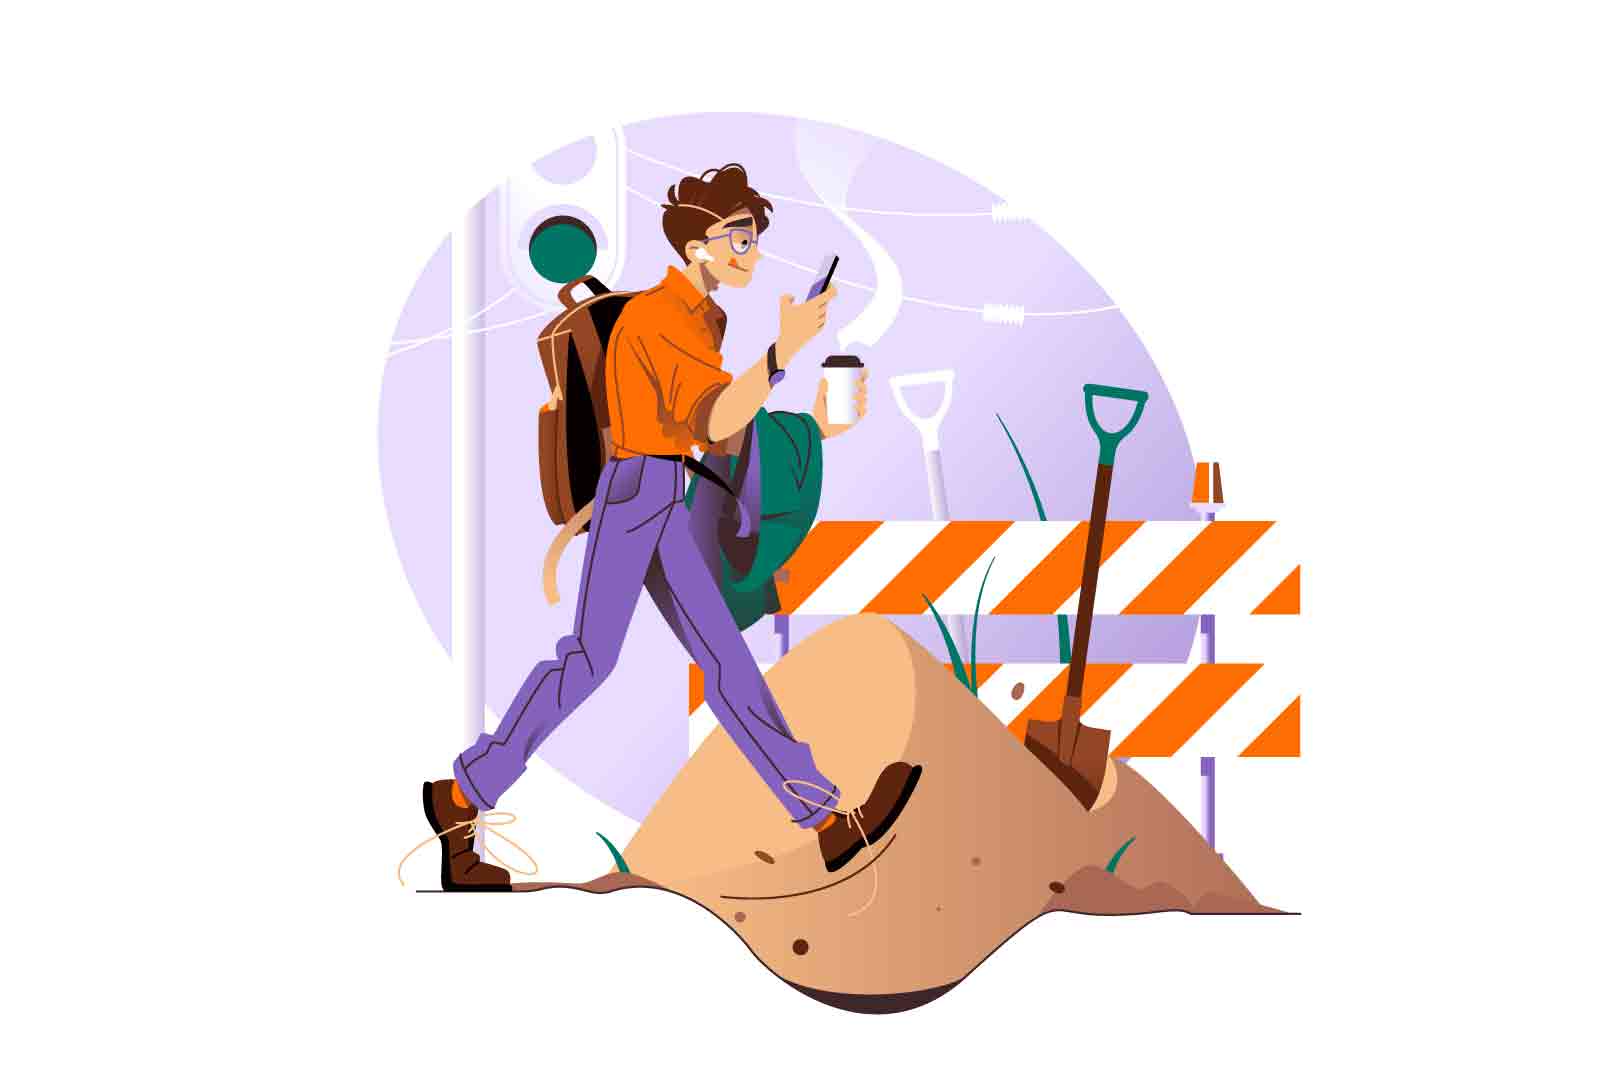 Distracted man walking and texting on cellphone vector illustration. Man about to fall into hole, flat style concept